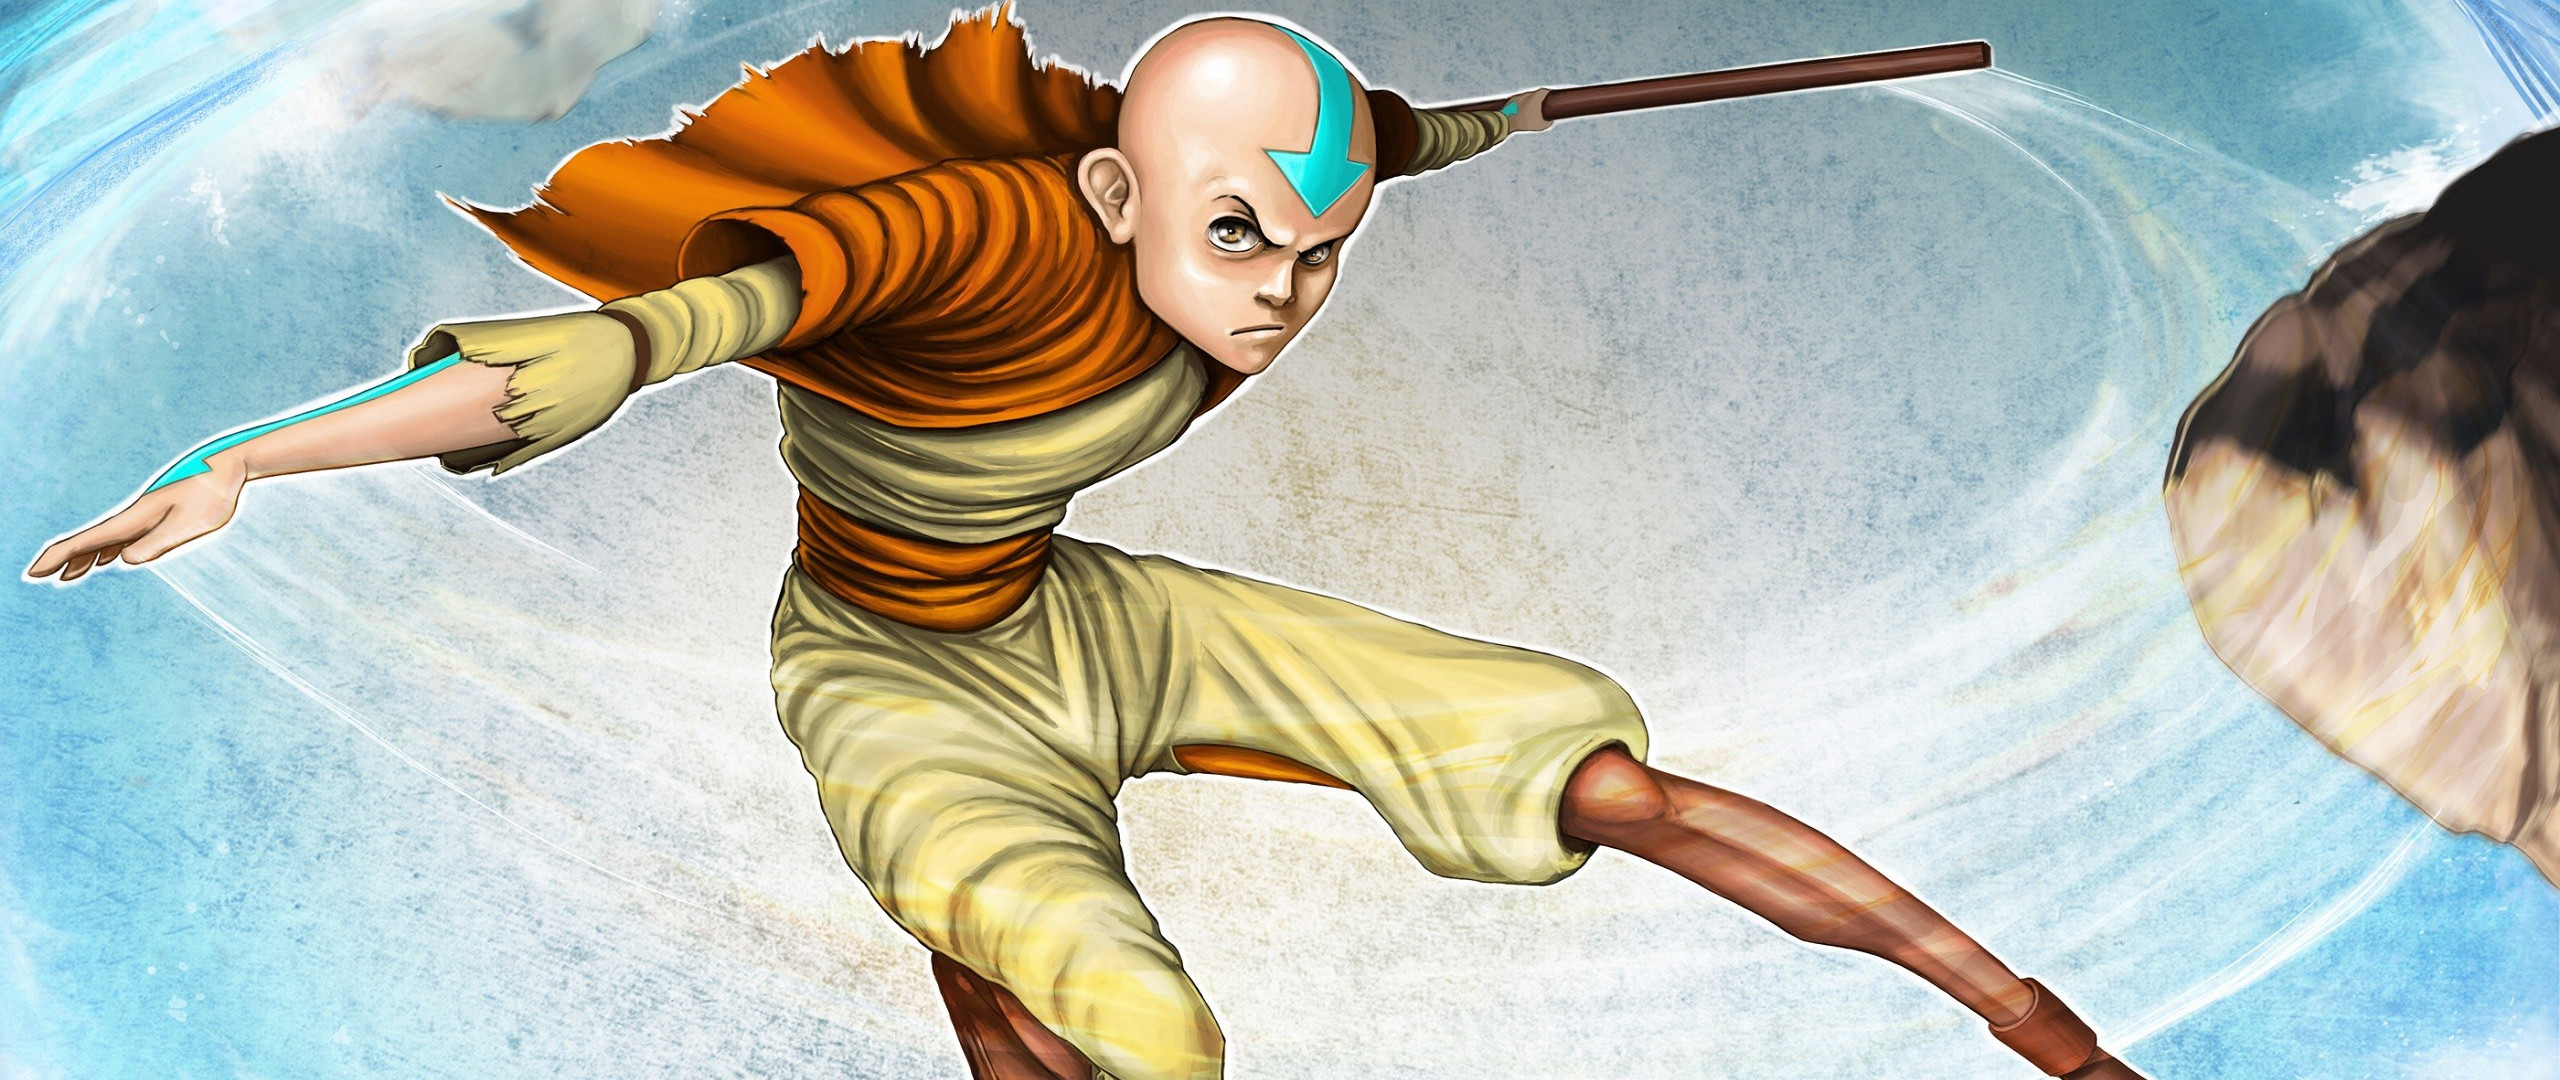 Avatar the Last Airbender Wallpapers (76+ pictures)